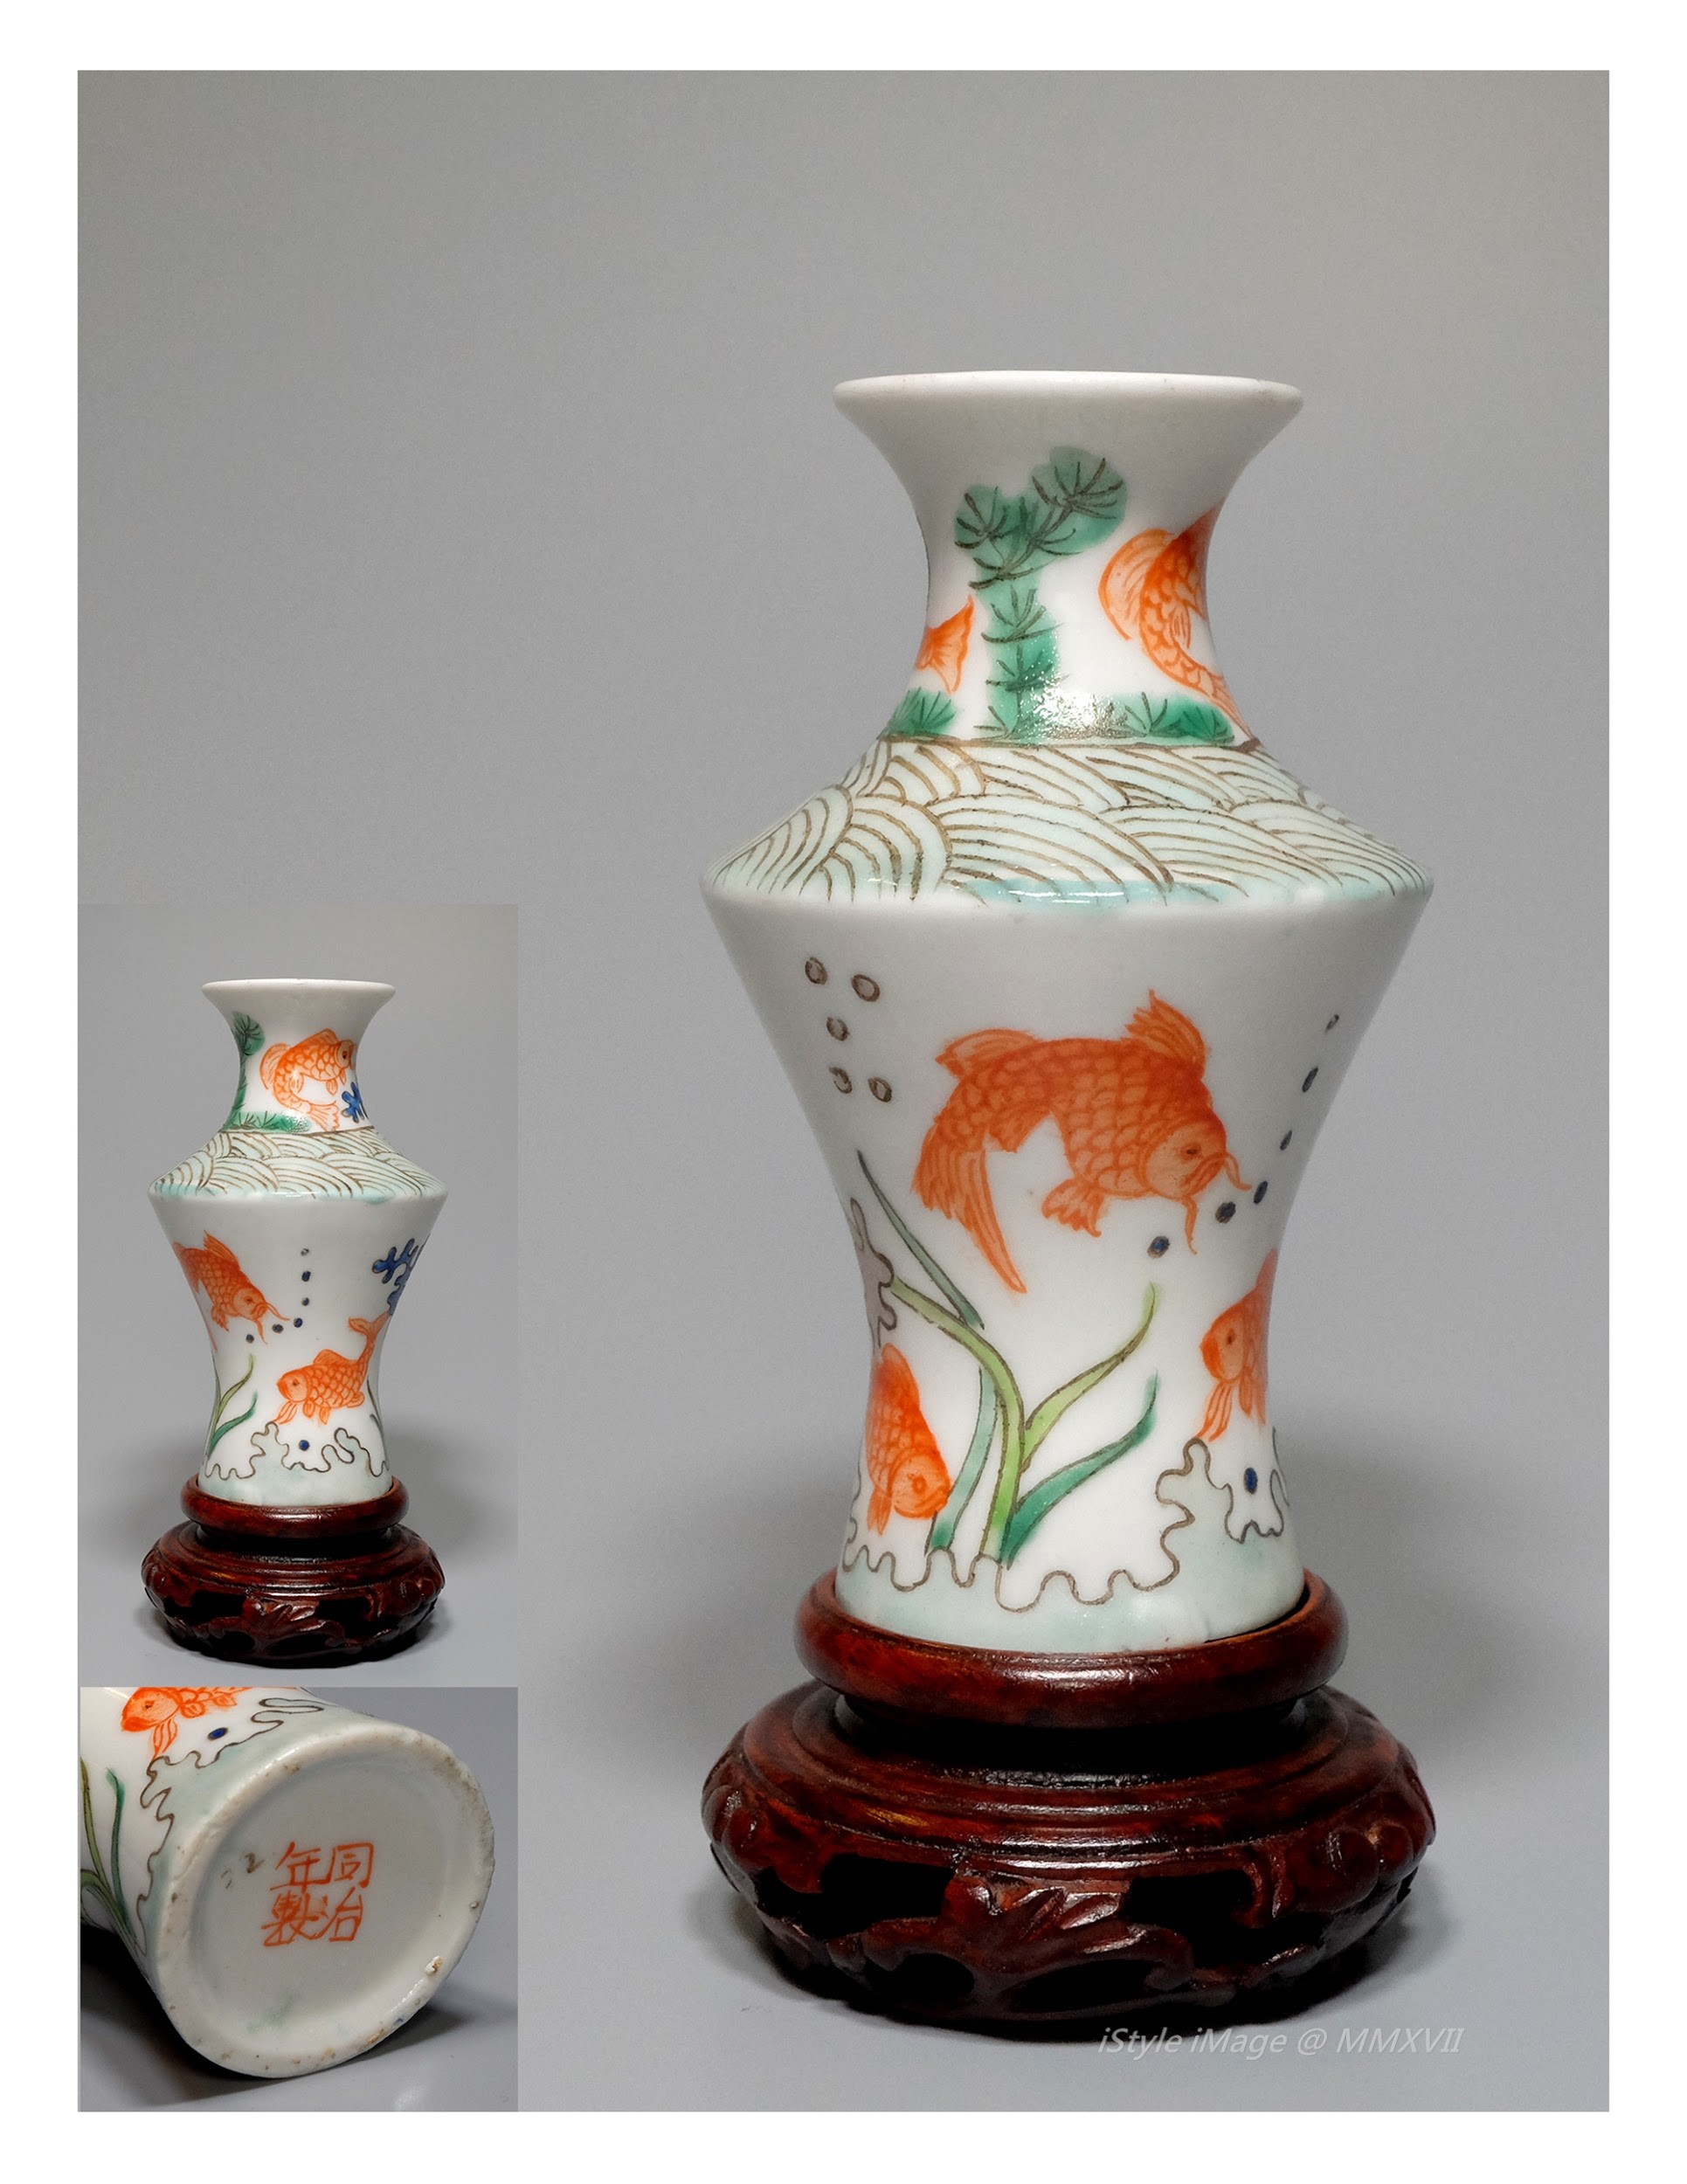 <br><h4>Lot 26 : An exceptional and elegant famille-rose vase ( with TongZhi marks but early Republic )</h4>
					  the baluster body rising from a spreading recessed reflex foot to an angled shoulder and a ribbed waisted neck and everted rim, beautifully painted with fish amongst water weed scene.  
					<br>The base glazed inscribed with four character [Tóngzhì nián zhì].	
					<br>Measurements (H) high 10.3 CM, (W)width 6 CM<br><br><br>優雅罕有的粉彩花瓶( [同治年製] 款，但屬民國早期 )<br>瓶身從喇叭腳上升到一個罕有的有角度的肩膀優雅的接著一個收窄內彎的頸部和翻邊，優美地繪了一幅鯉魚戲水圖。<br>尺寸(H)高 10.3 厘米,  (W)濶6 厘米